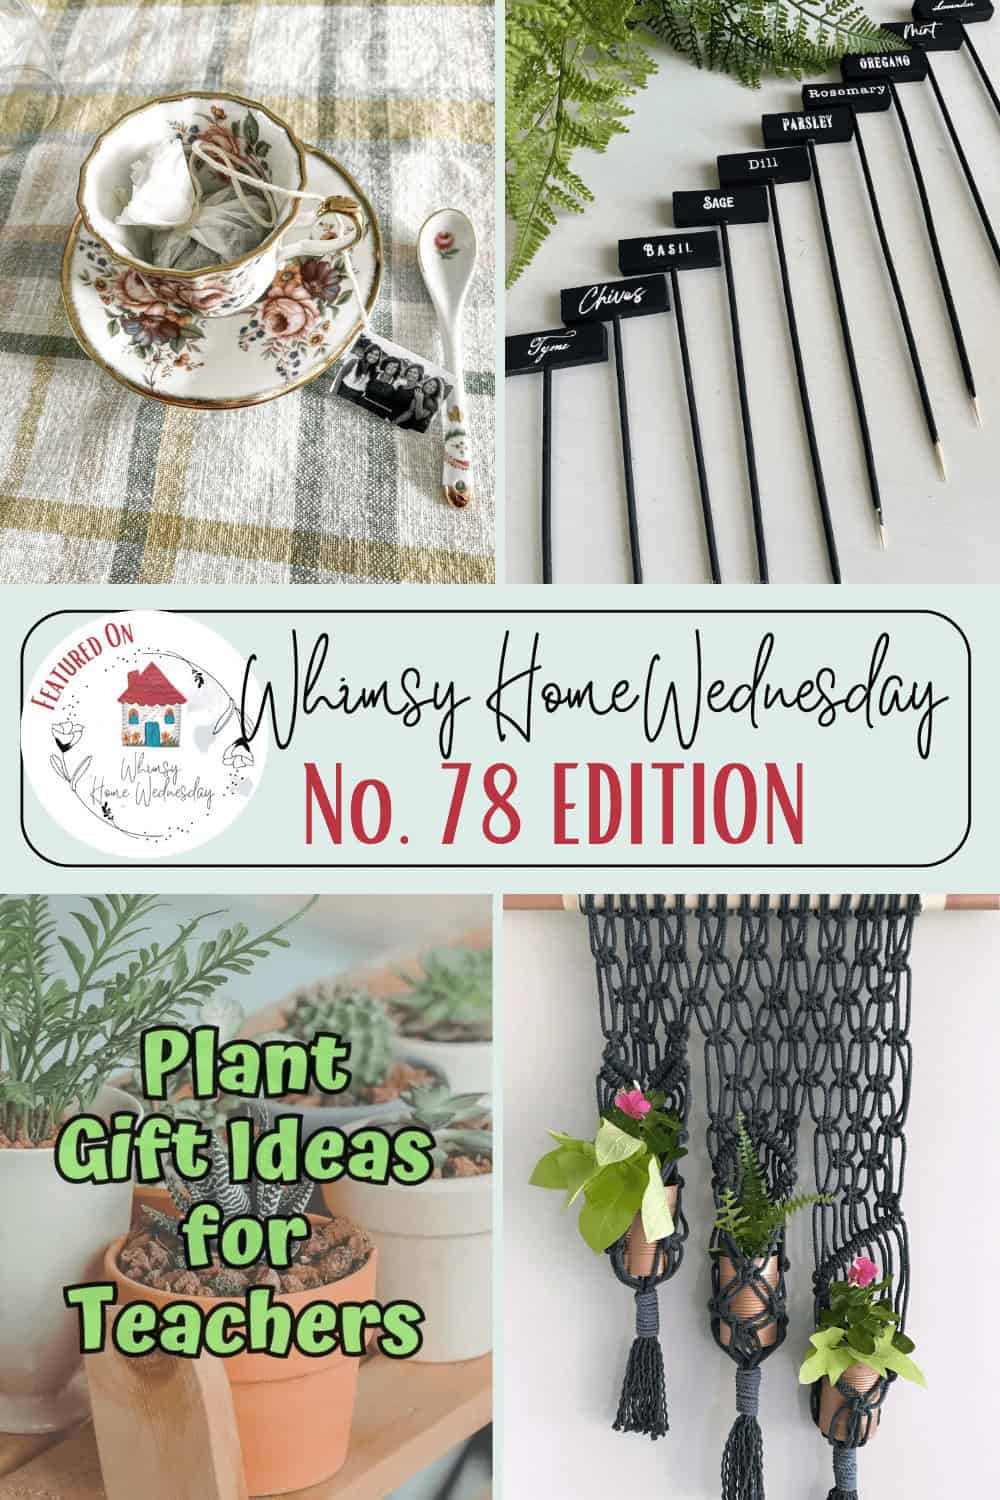 Collage of home and gift ideas: a tea set on a table, labeled paintbrushes, a text overlay about 'whimsy home wednesday no. 78', and hanging macramé plant holders.